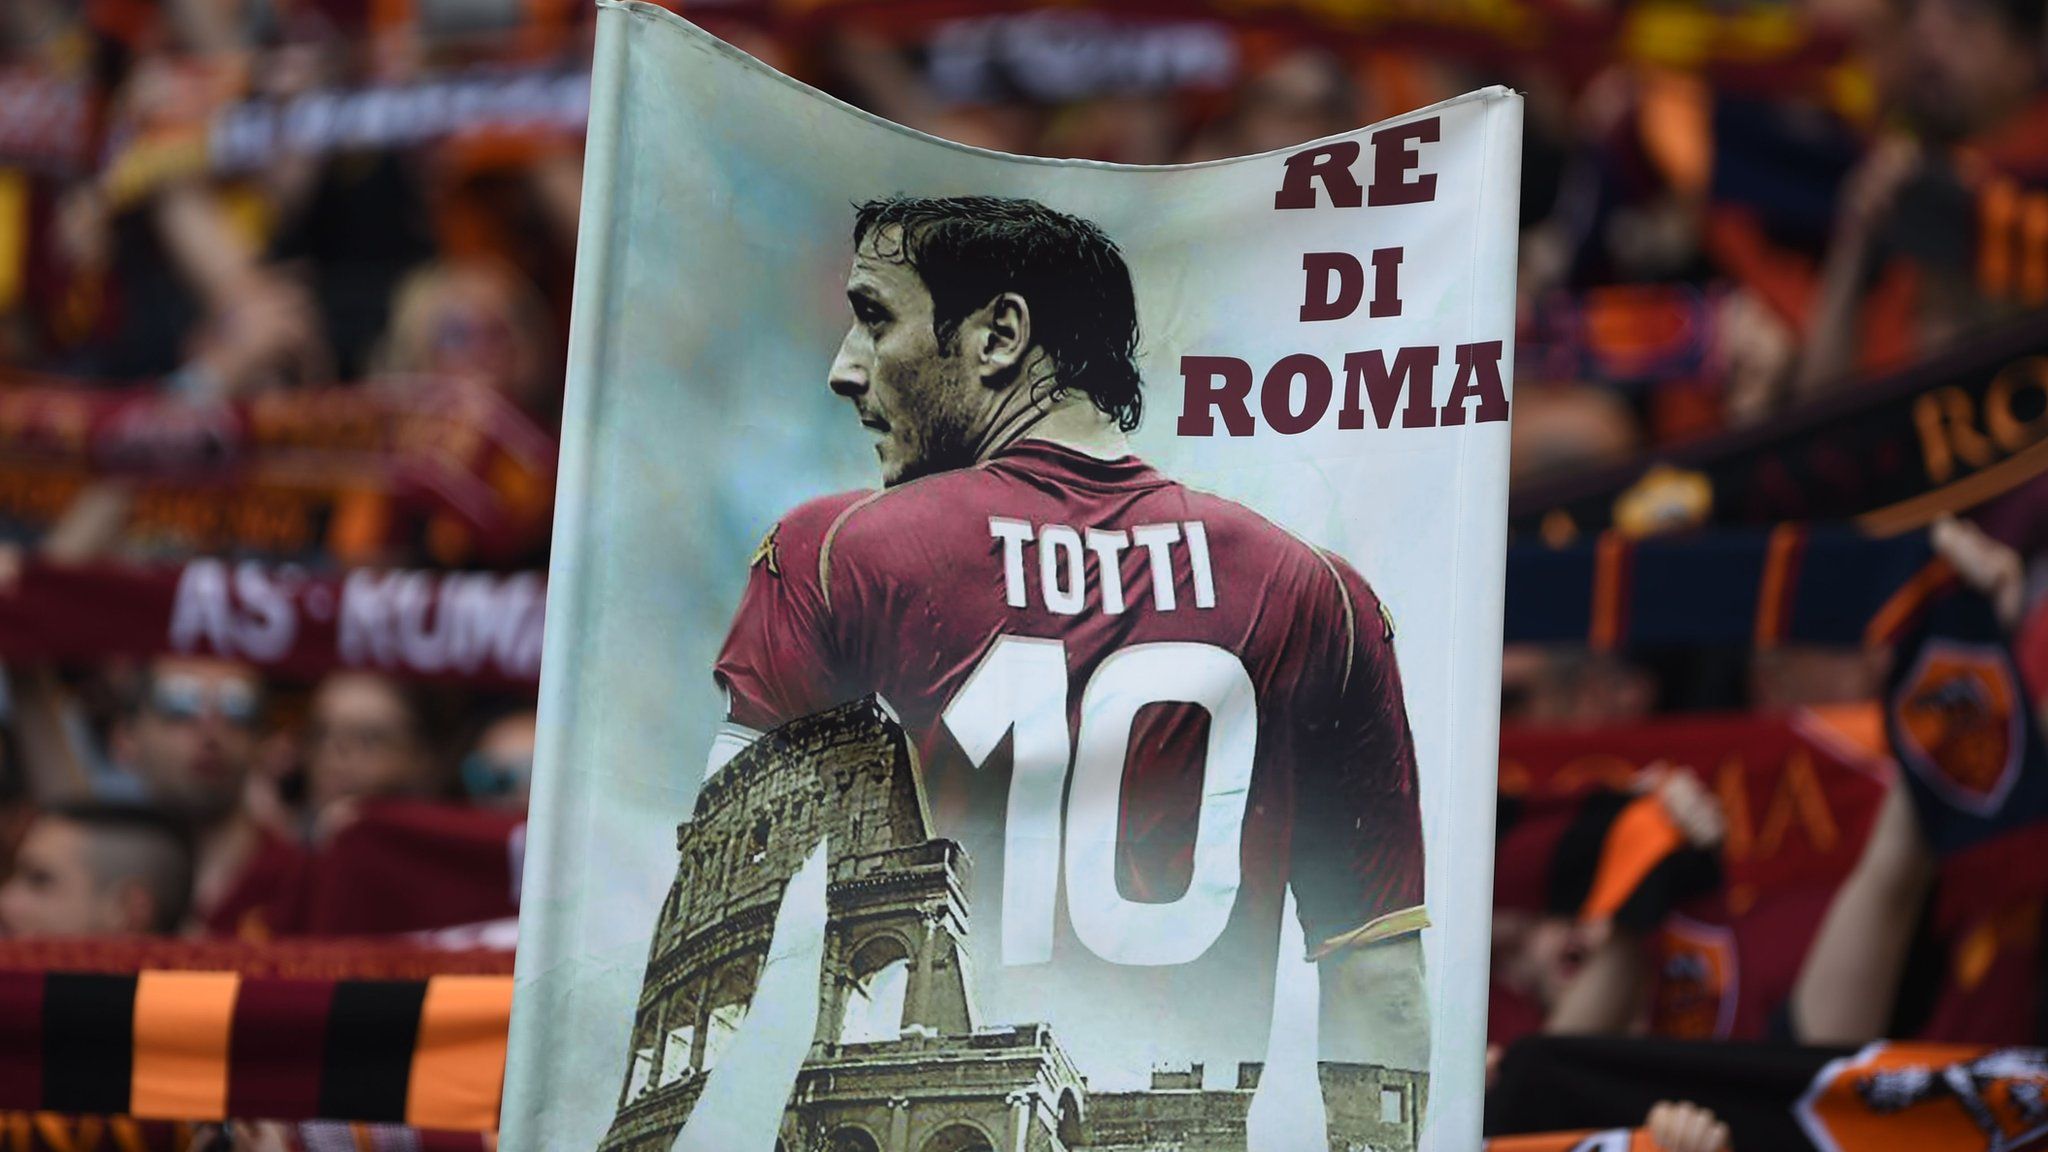 Roma fans hold up a banner in support of captain and striker Francesco Totti